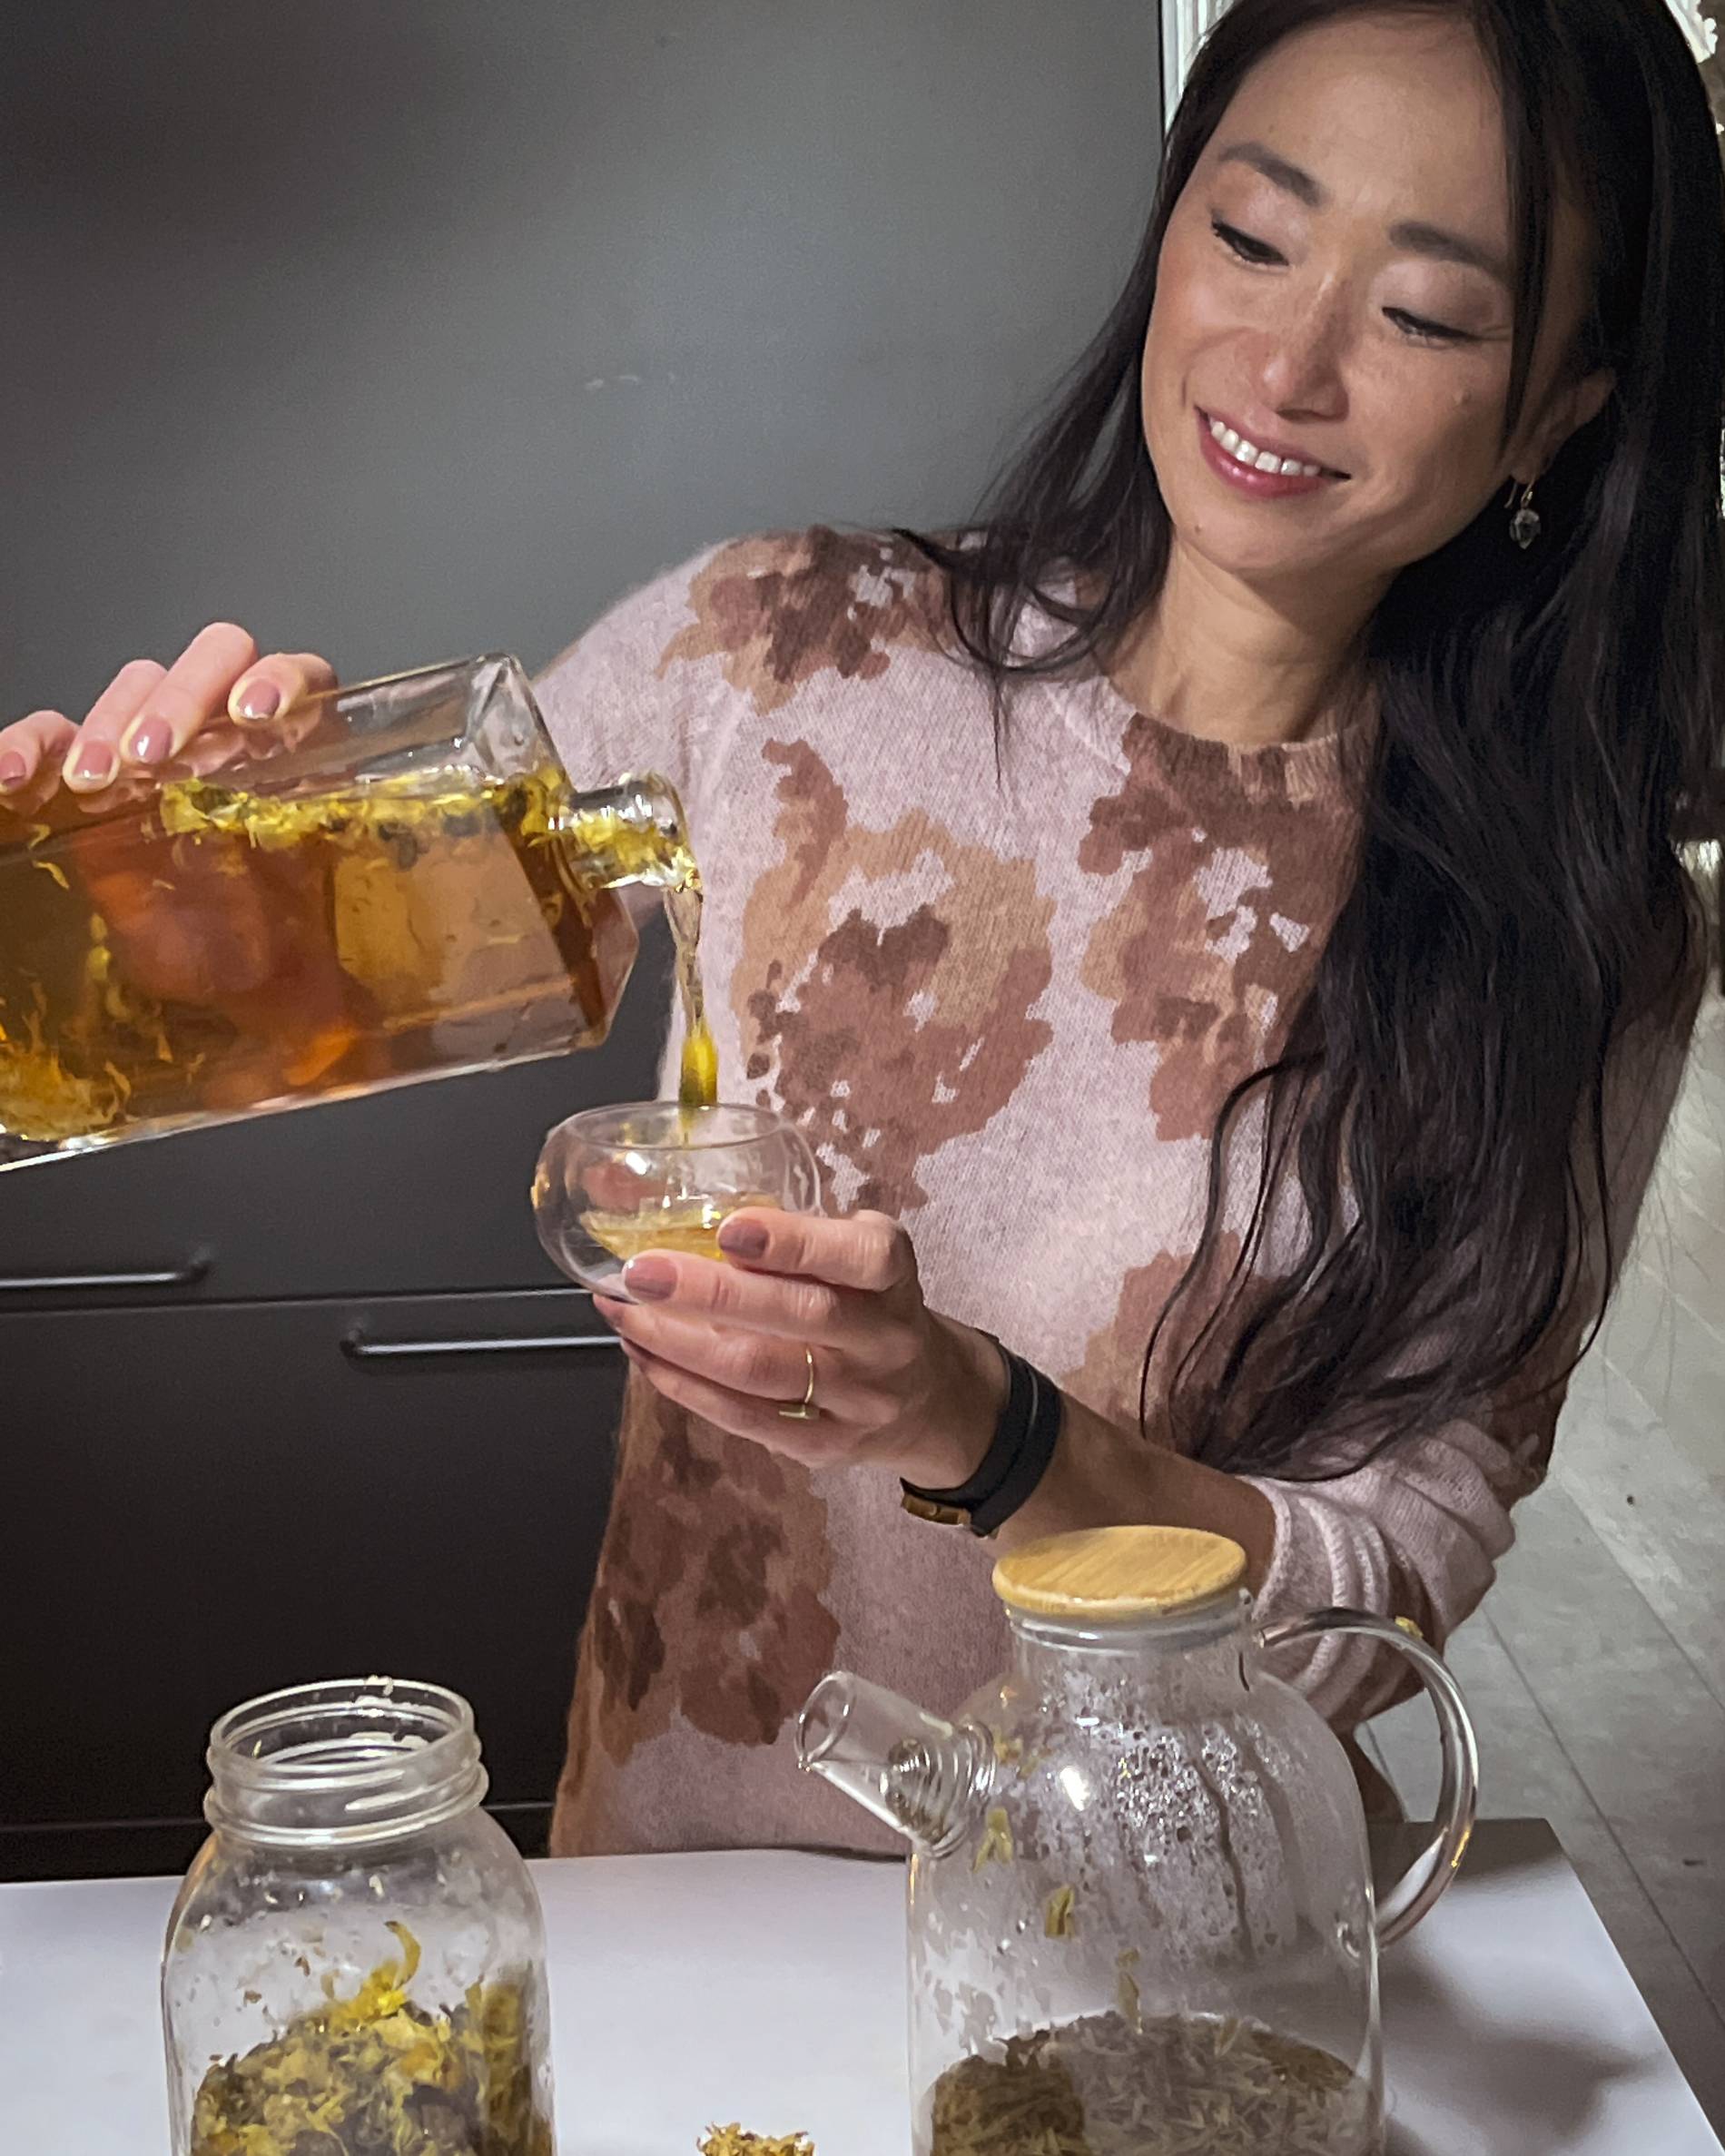 Danielle Chang pouring home-brewed tea